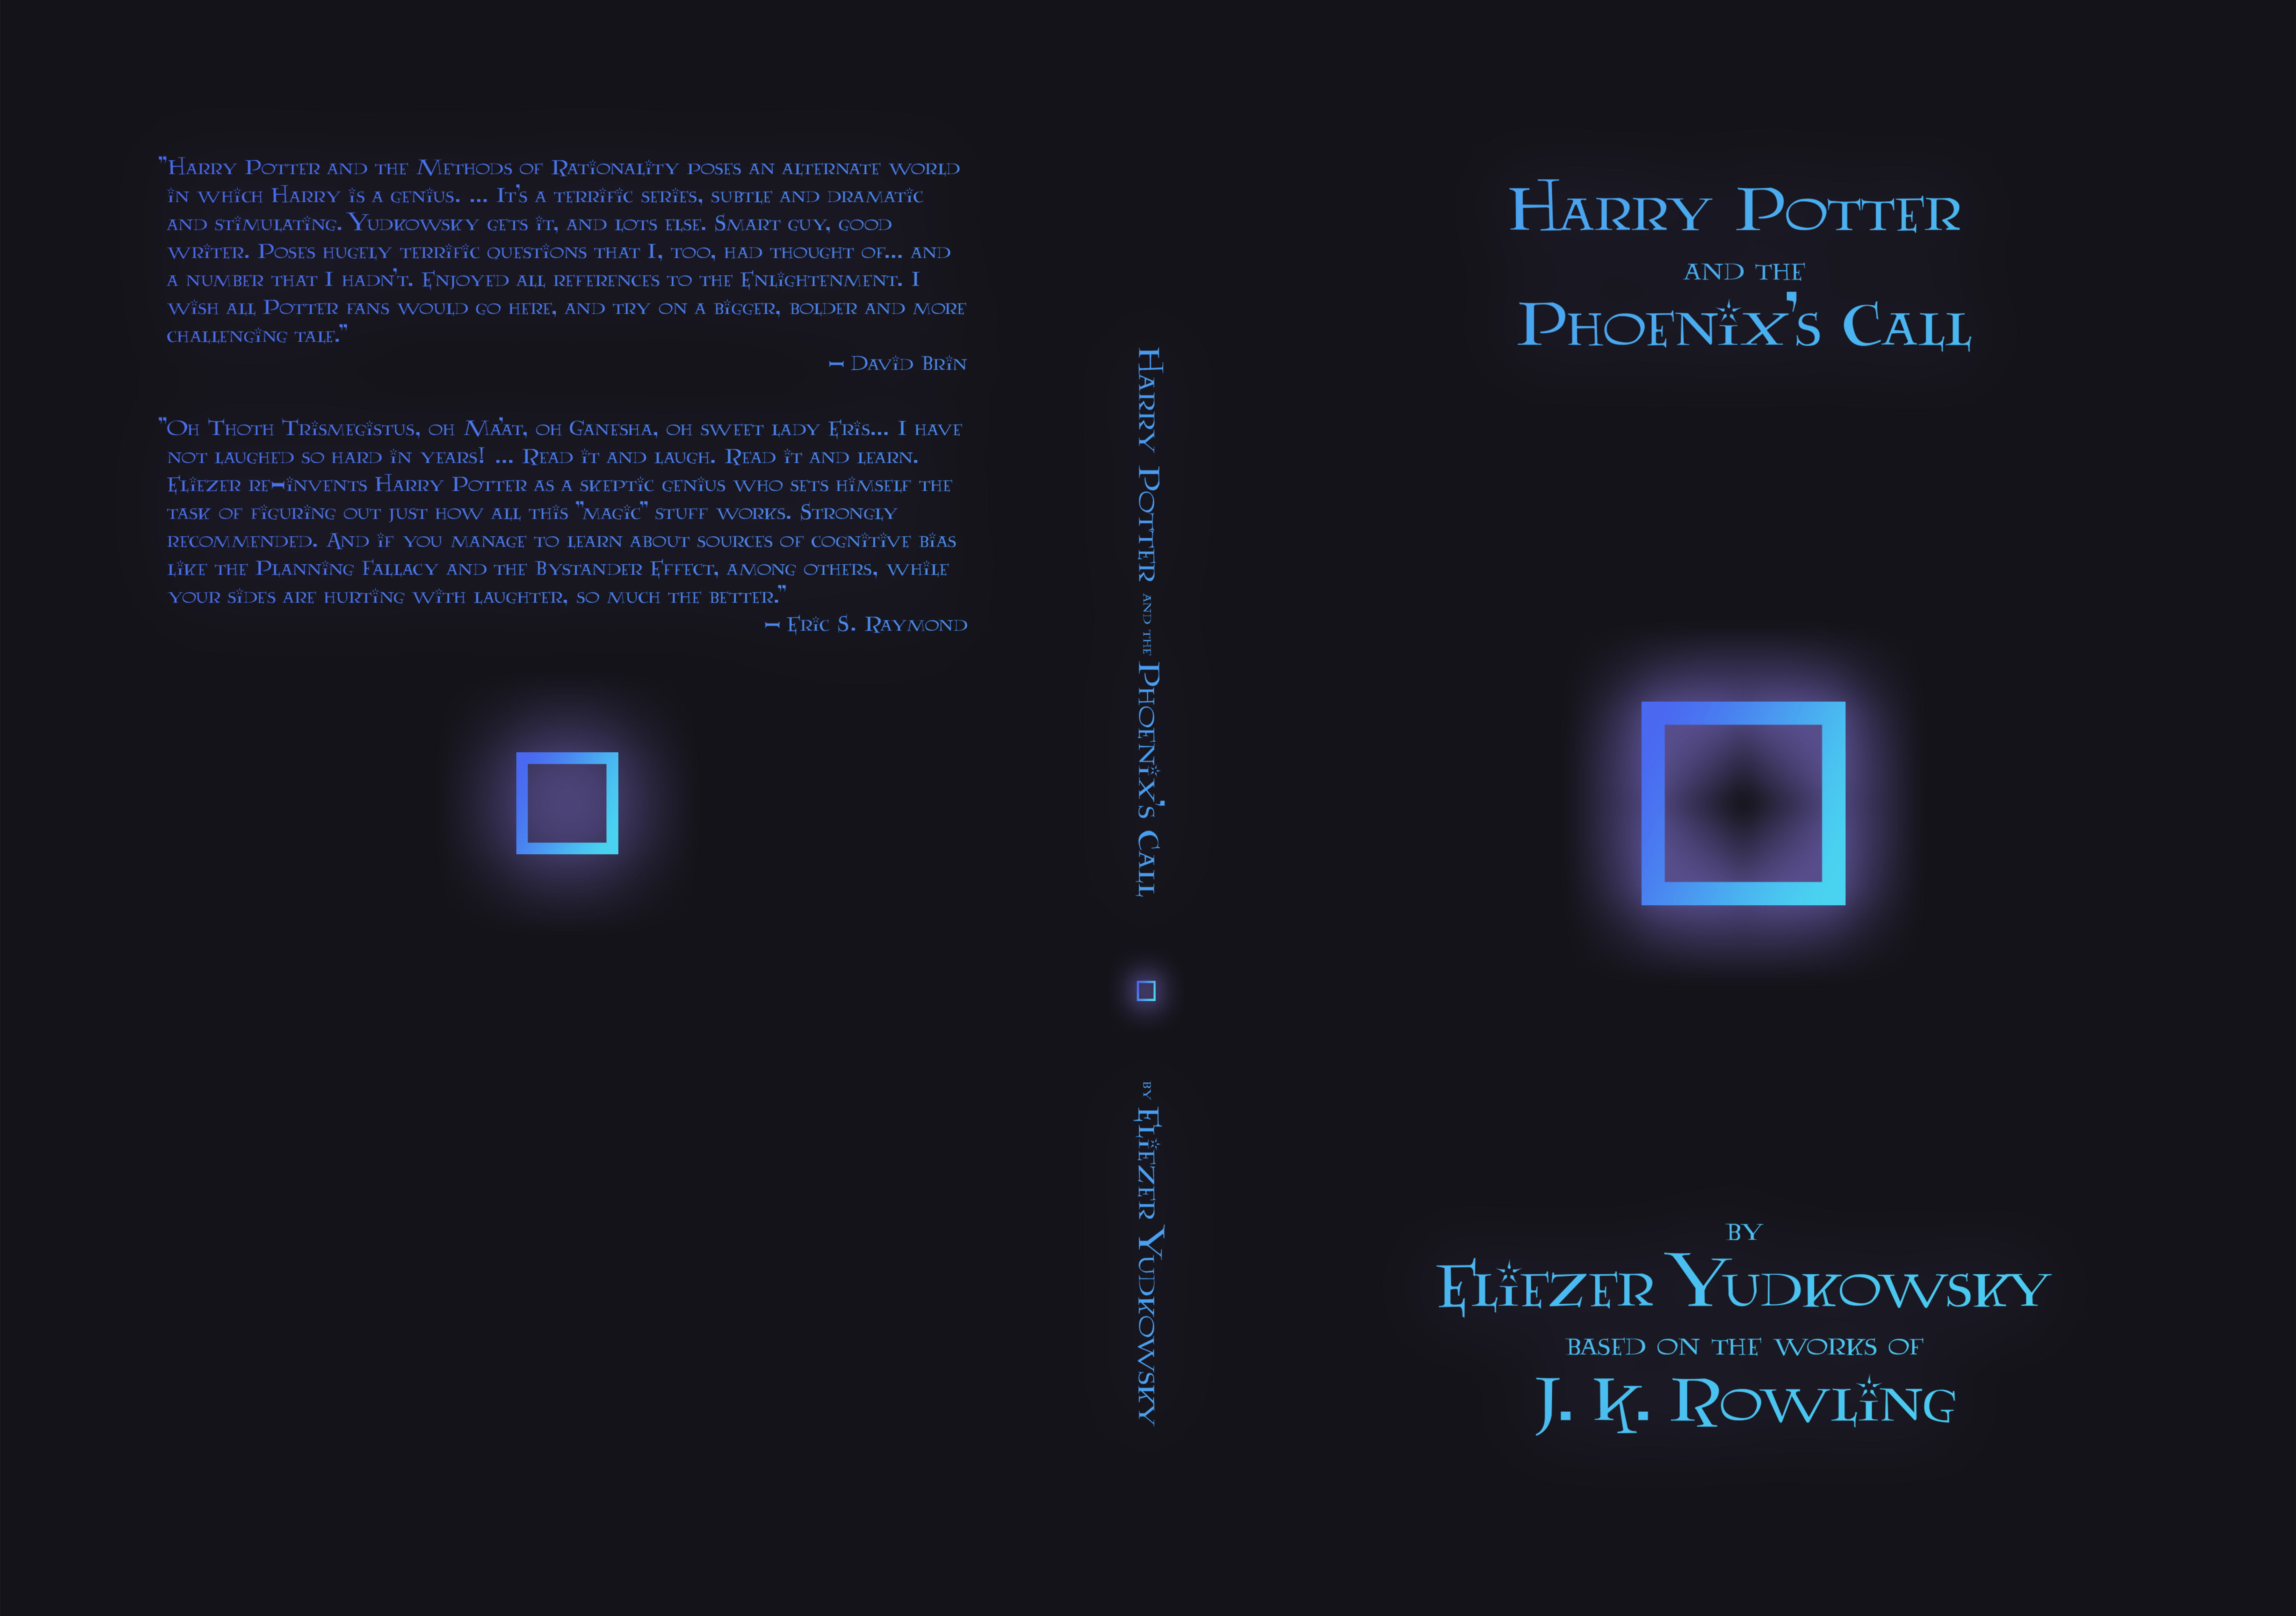 Volume 4: Harry Potter and the Phoenix's Call